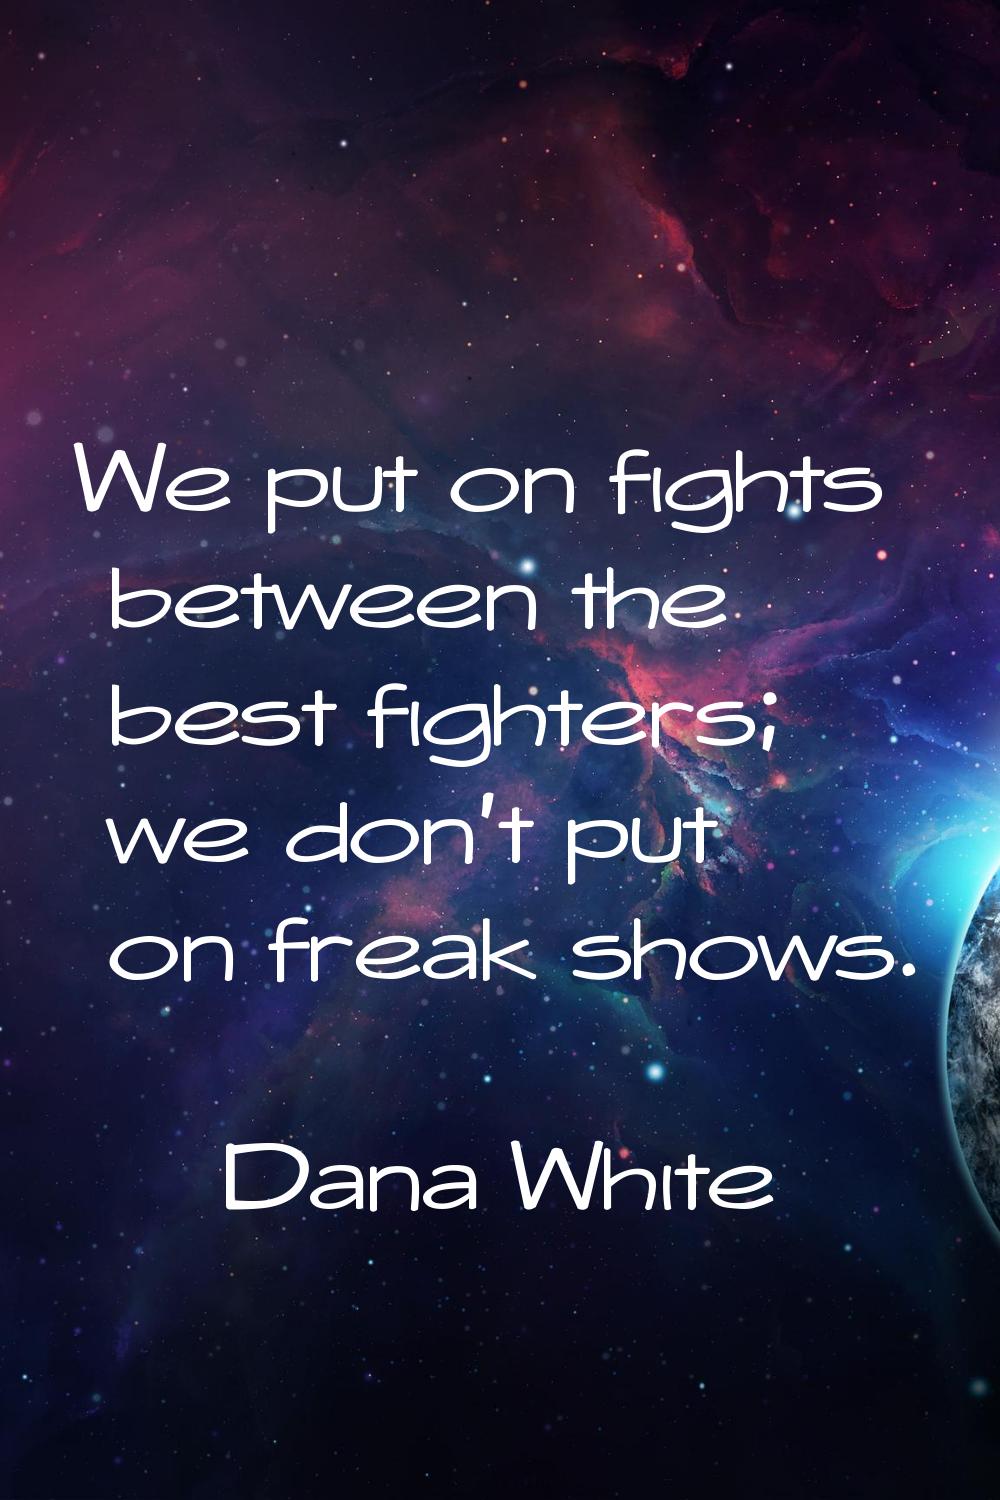 We put on fights between the best fighters; we don't put on freak shows.